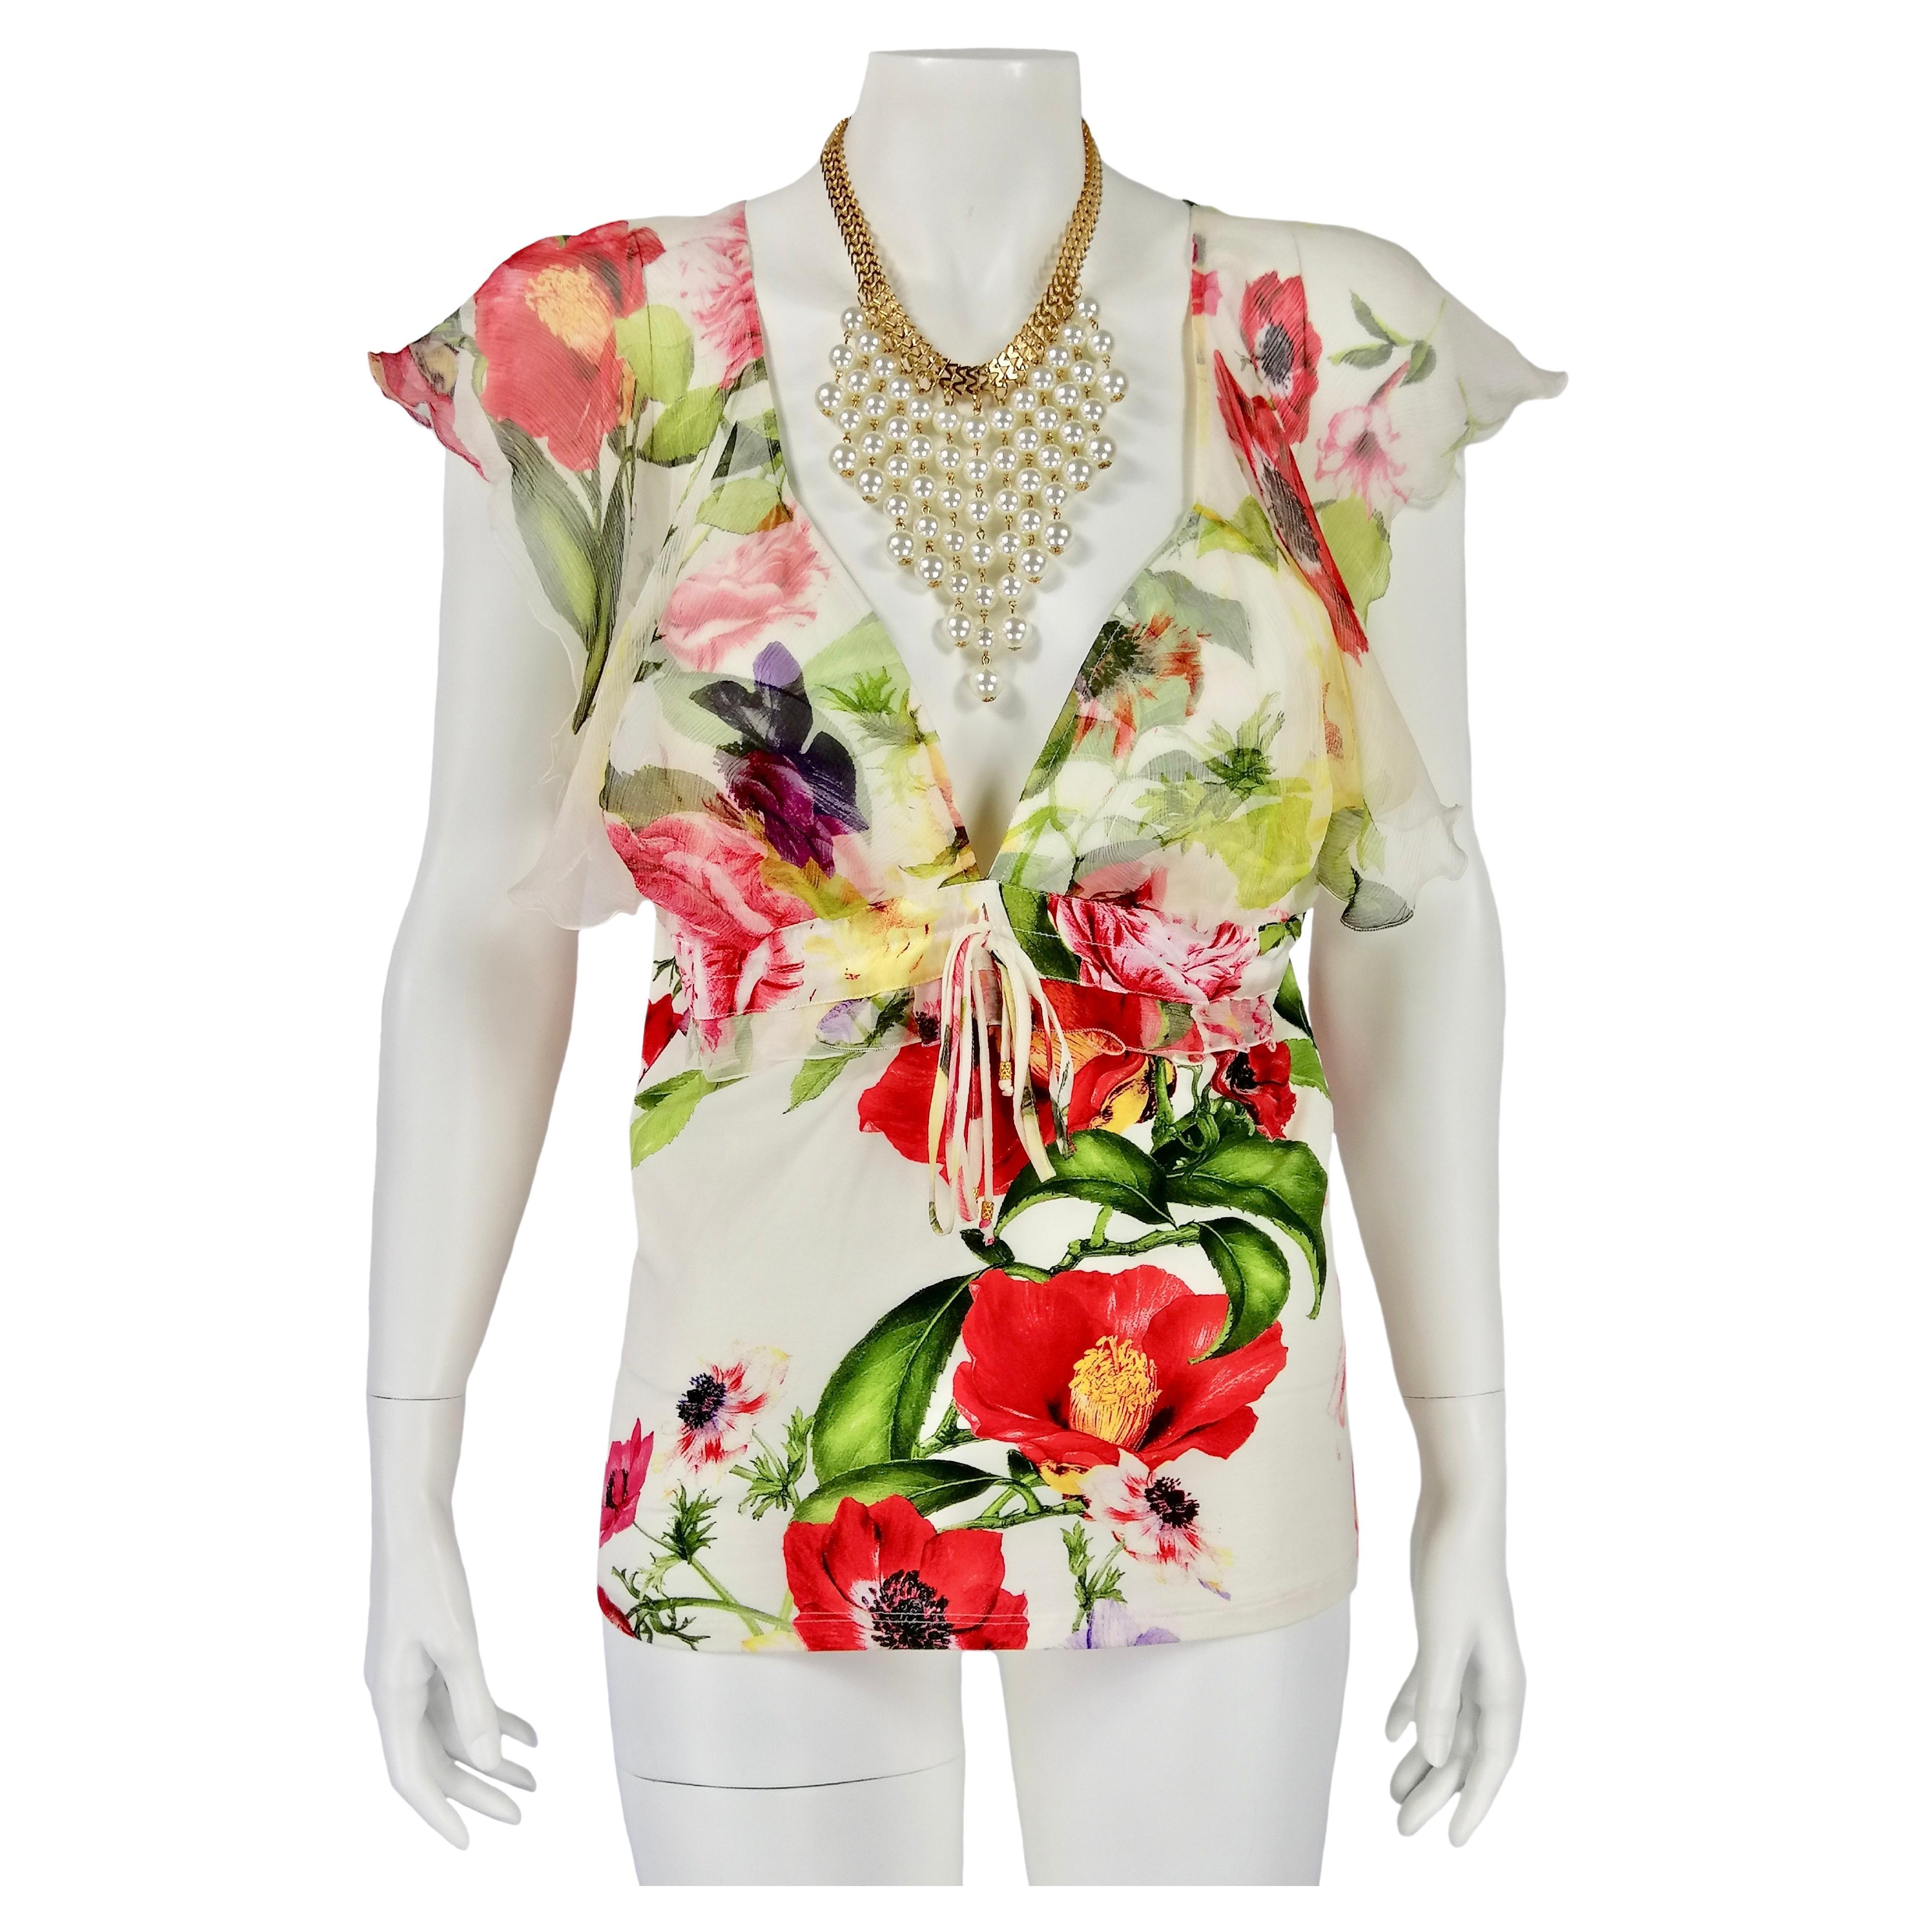 ROBERTO CAVALLI
Floral patterned shirt with white background, silk bodice and ruffles on the shoulders. He has drawstring under the bust.
88% cotton
12% elastane
Contrasts 100% silk
Size IT 46
Made in Italy
Flat measures:
Length cm. 59
Shoulders cm.